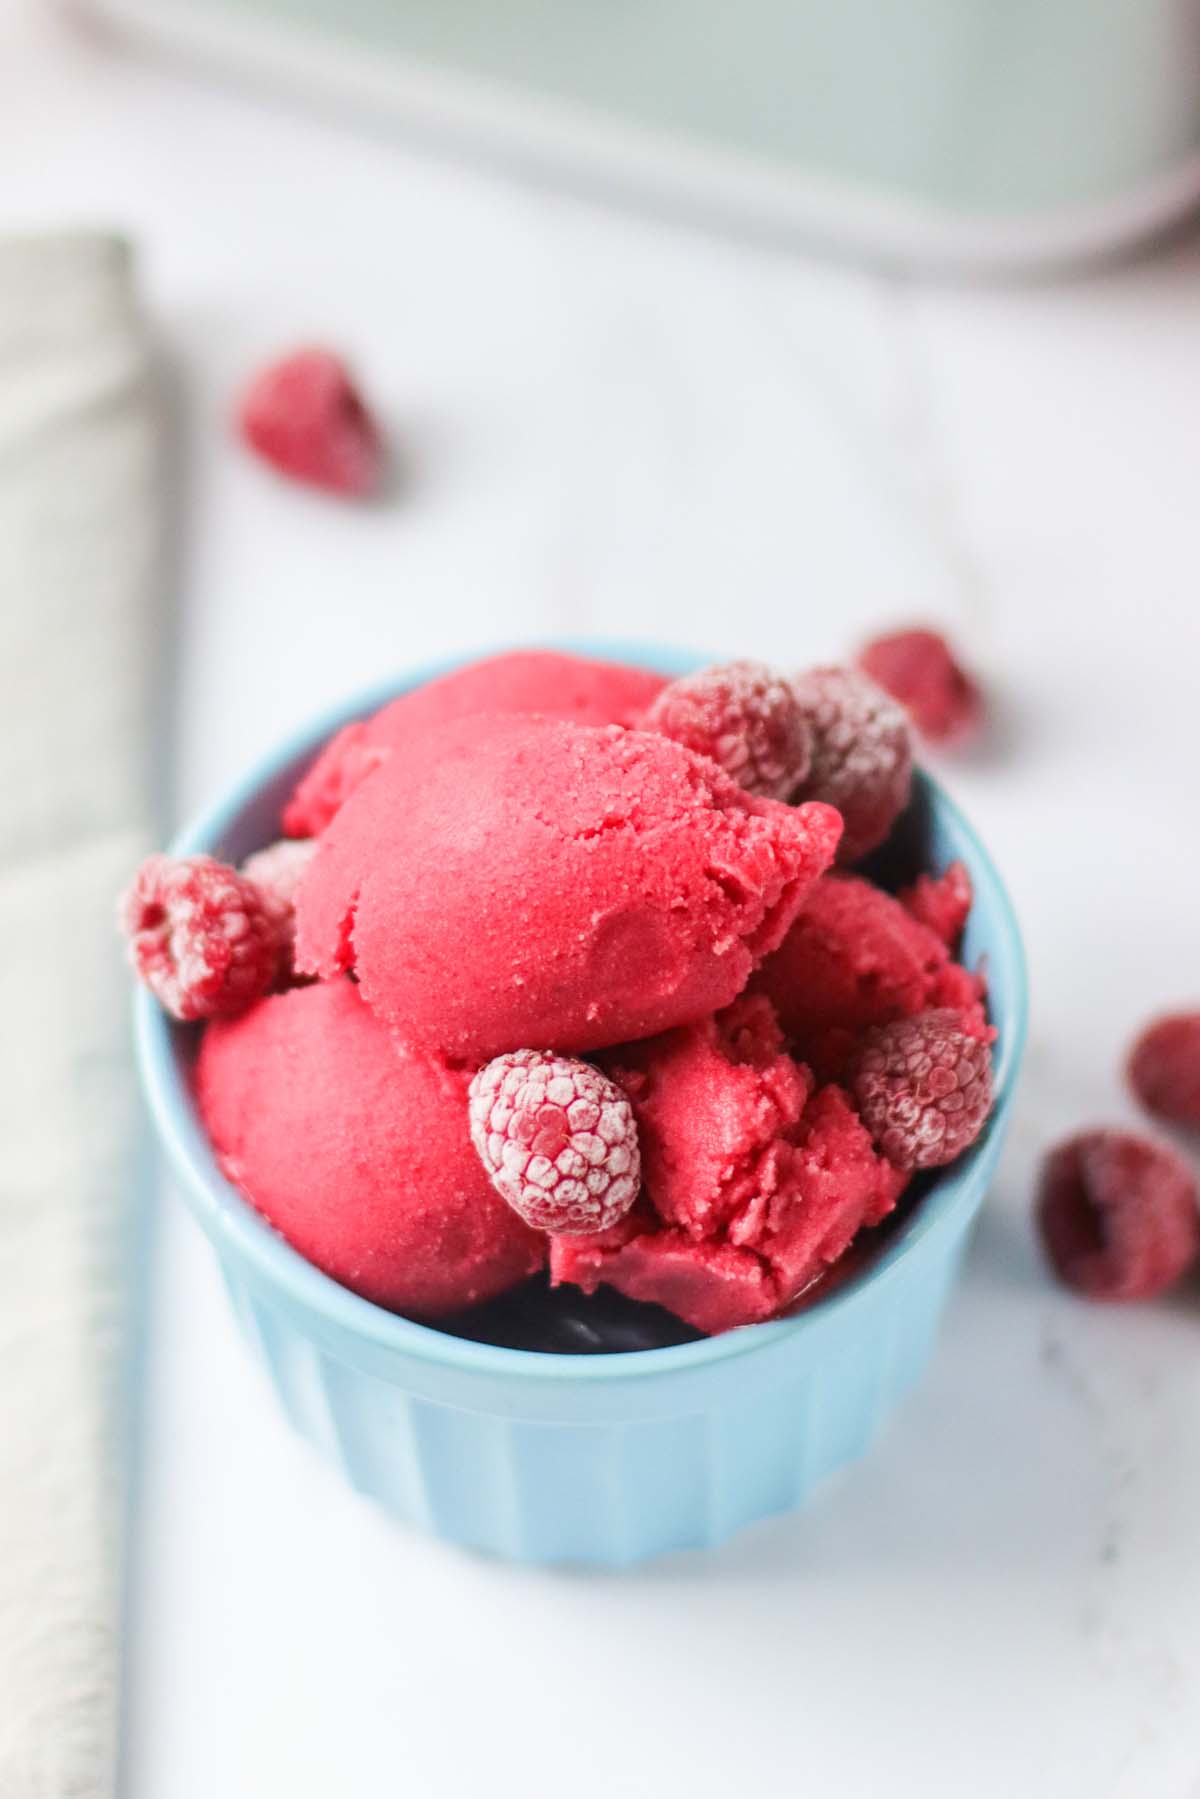 sorbet in a blue bowl topped with raspberries.